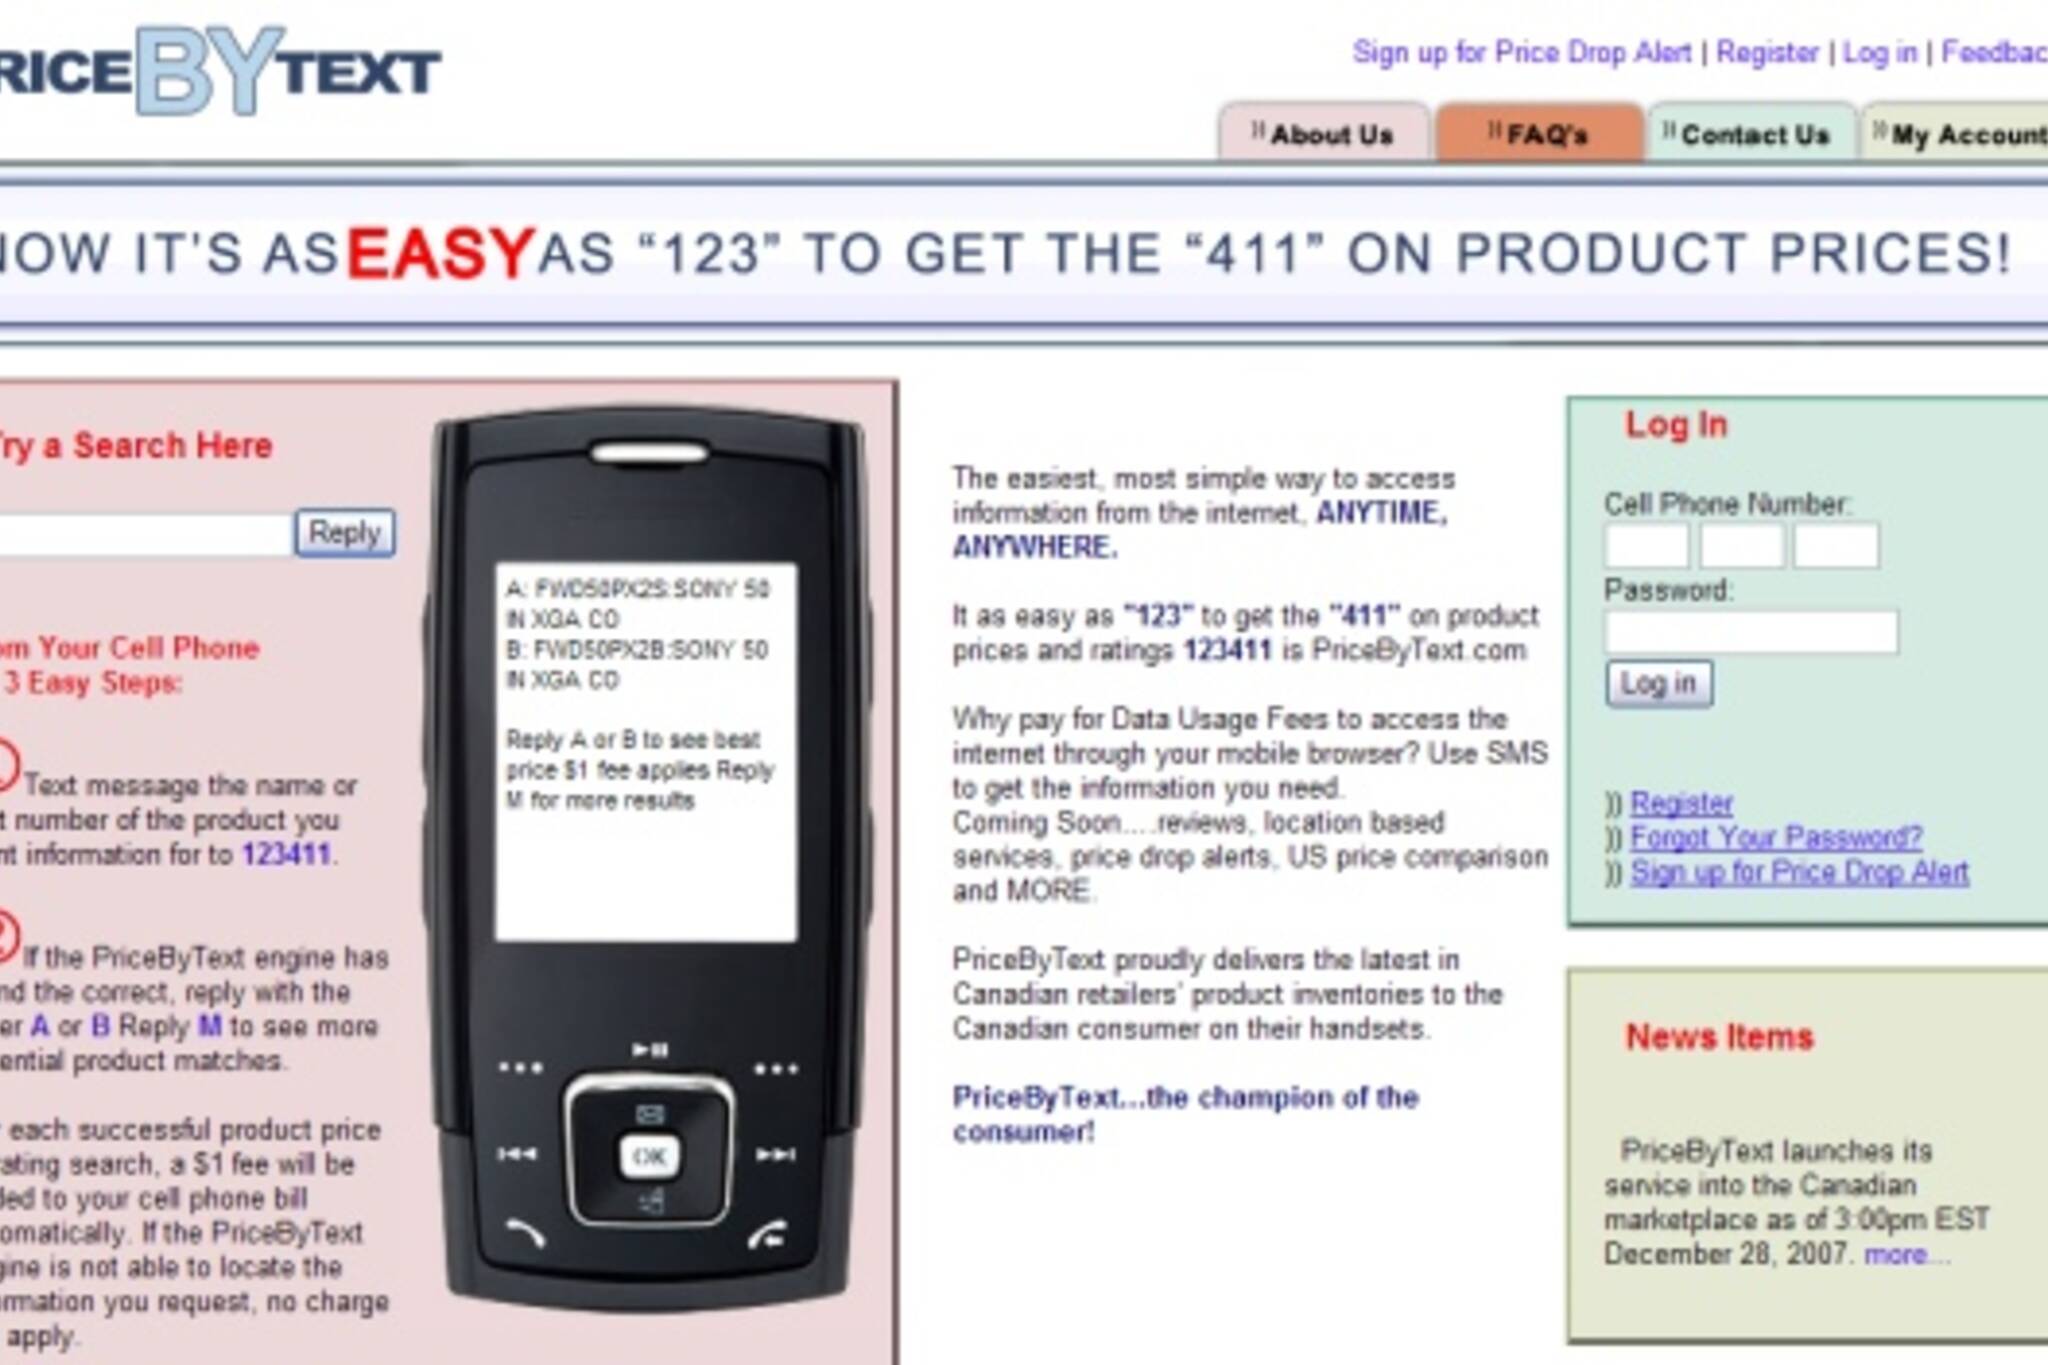 PriceByText allows comparison shopping by cell phone text message